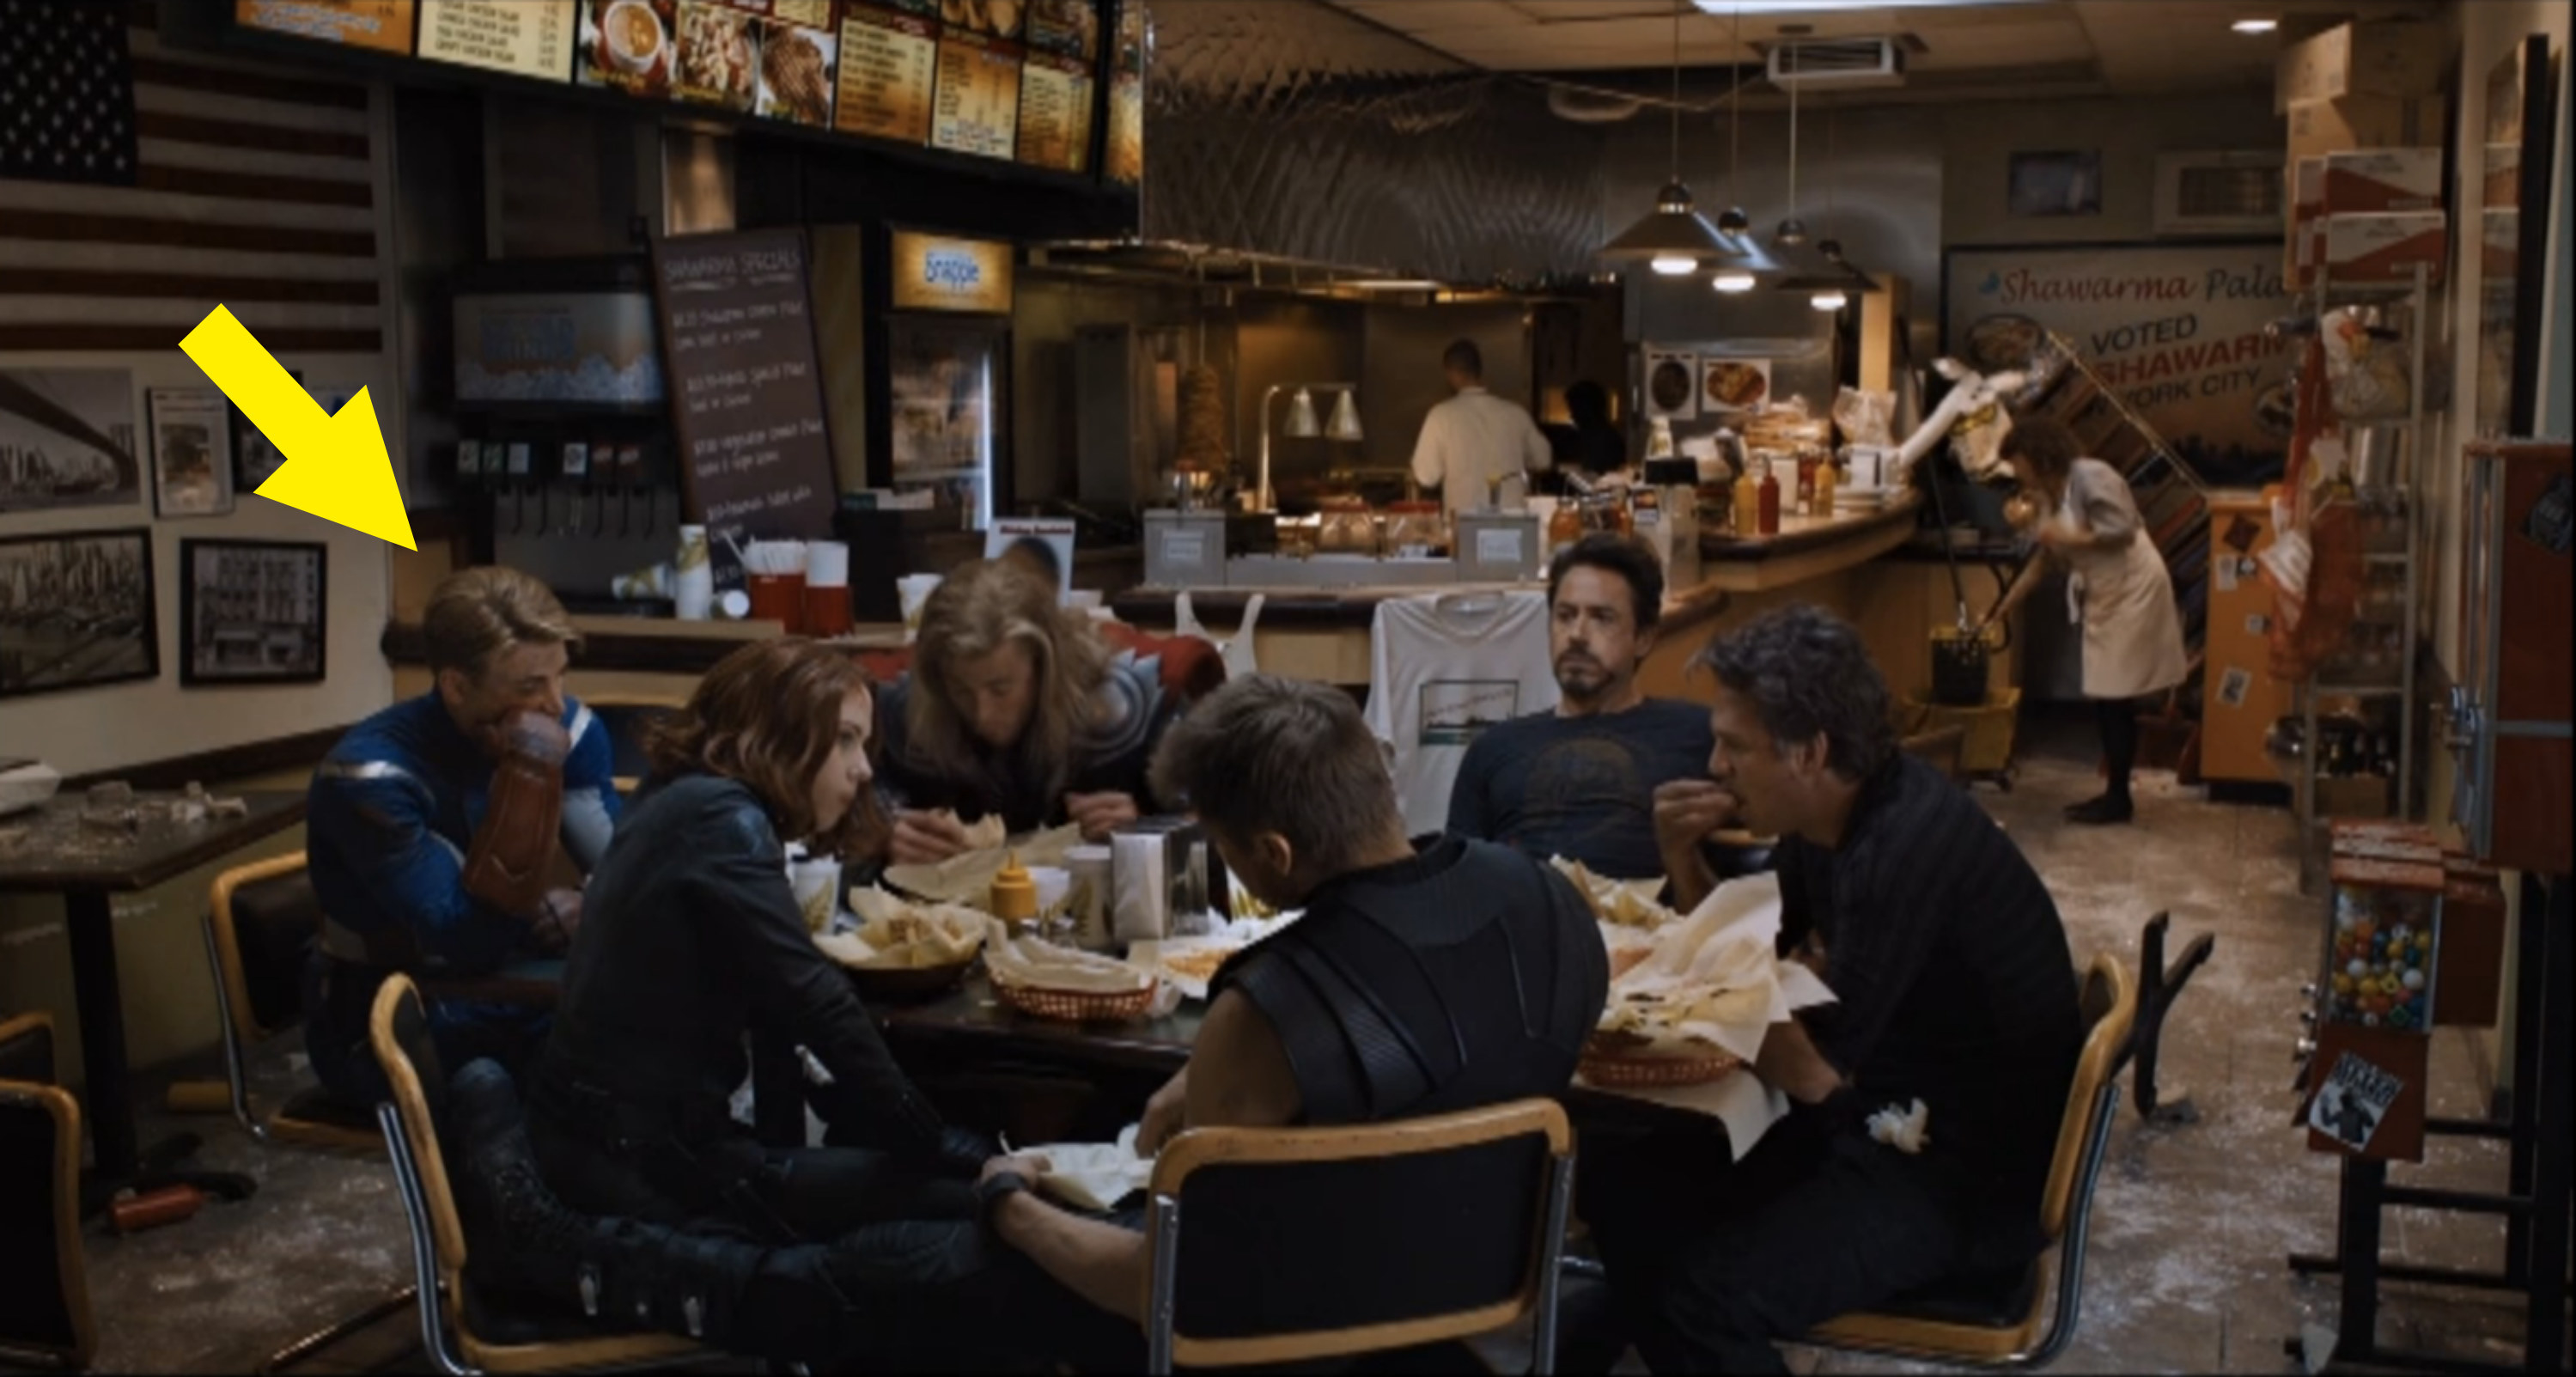 The Avengers eating shawarma at the end of &quot;The Avengers.&quot;